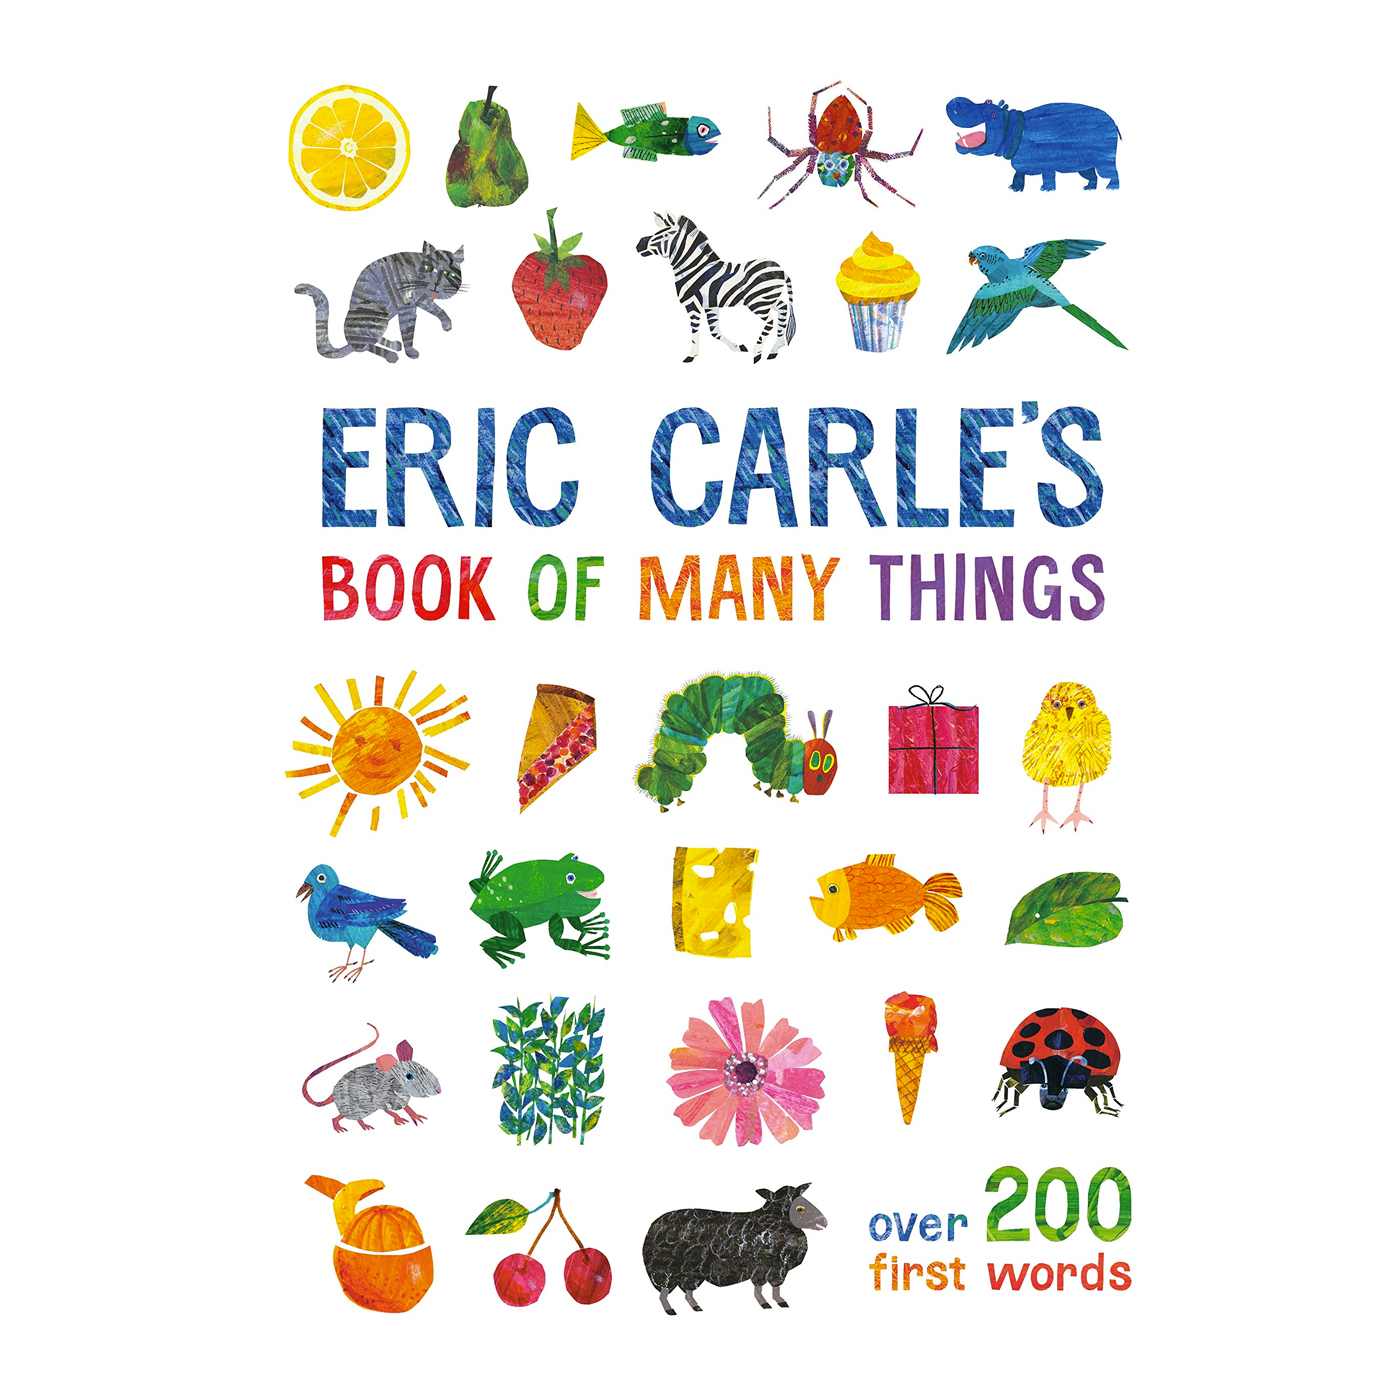  Eric Carles Book Of Many Things